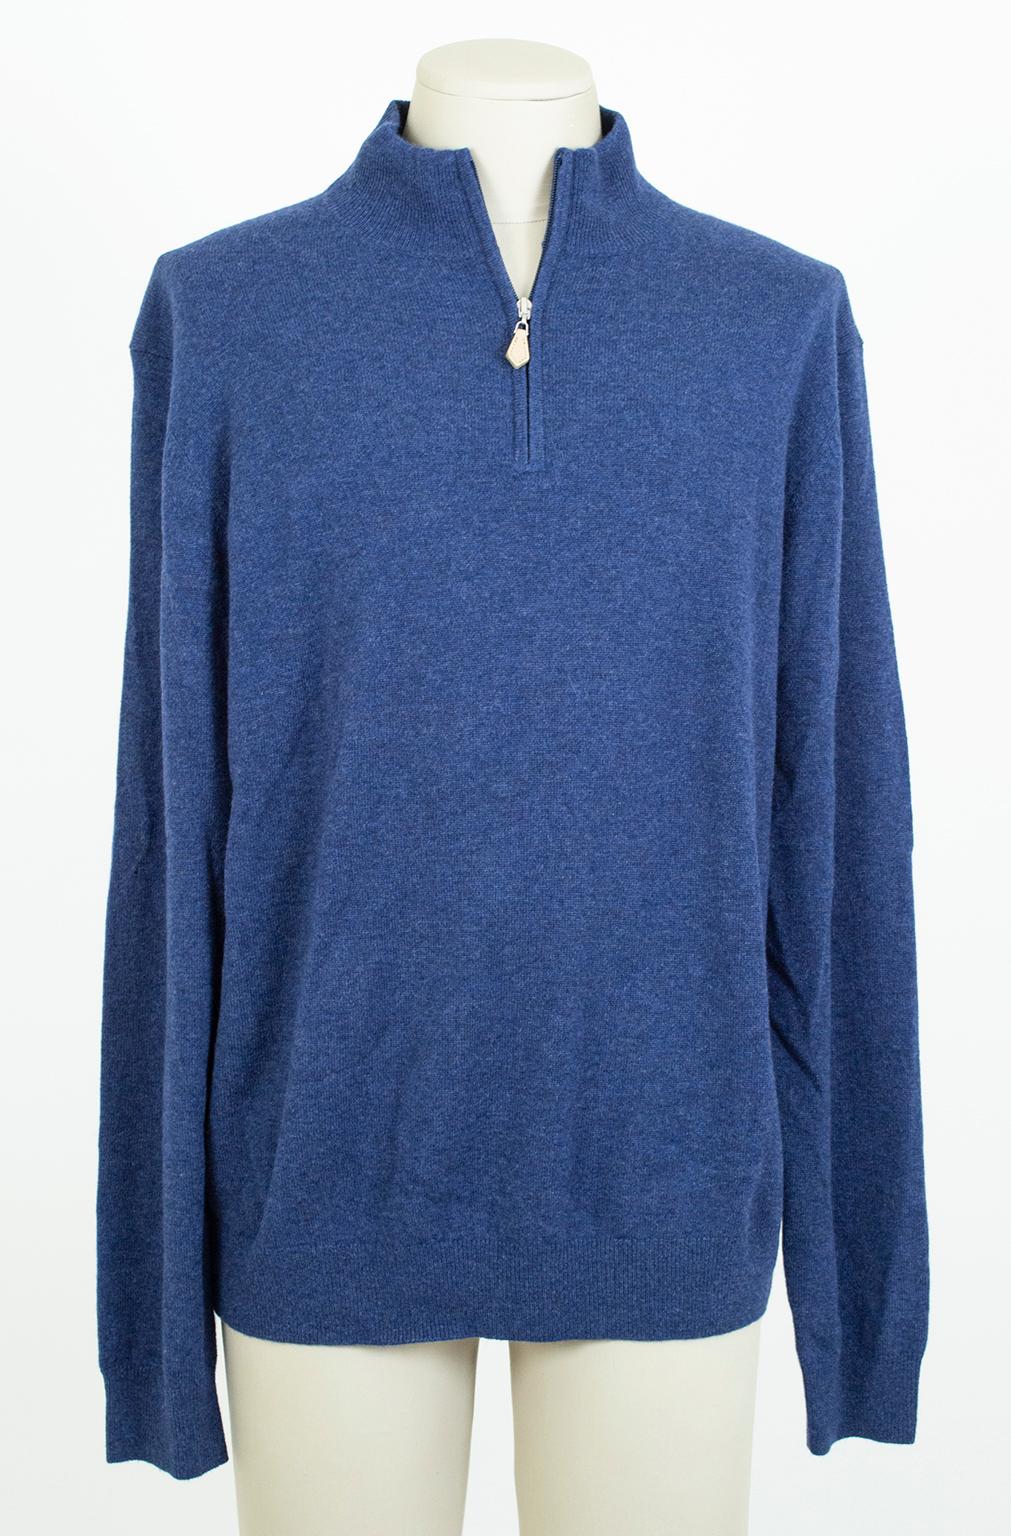 A polar vortex or deep winter freeze need not mean dressing like the Michelin Man: layer up in style with this baby soft cashmere half-zip pullover from Neiman Marcus. The perfect shade of marine blue—halfway between French and navy—it can be worn